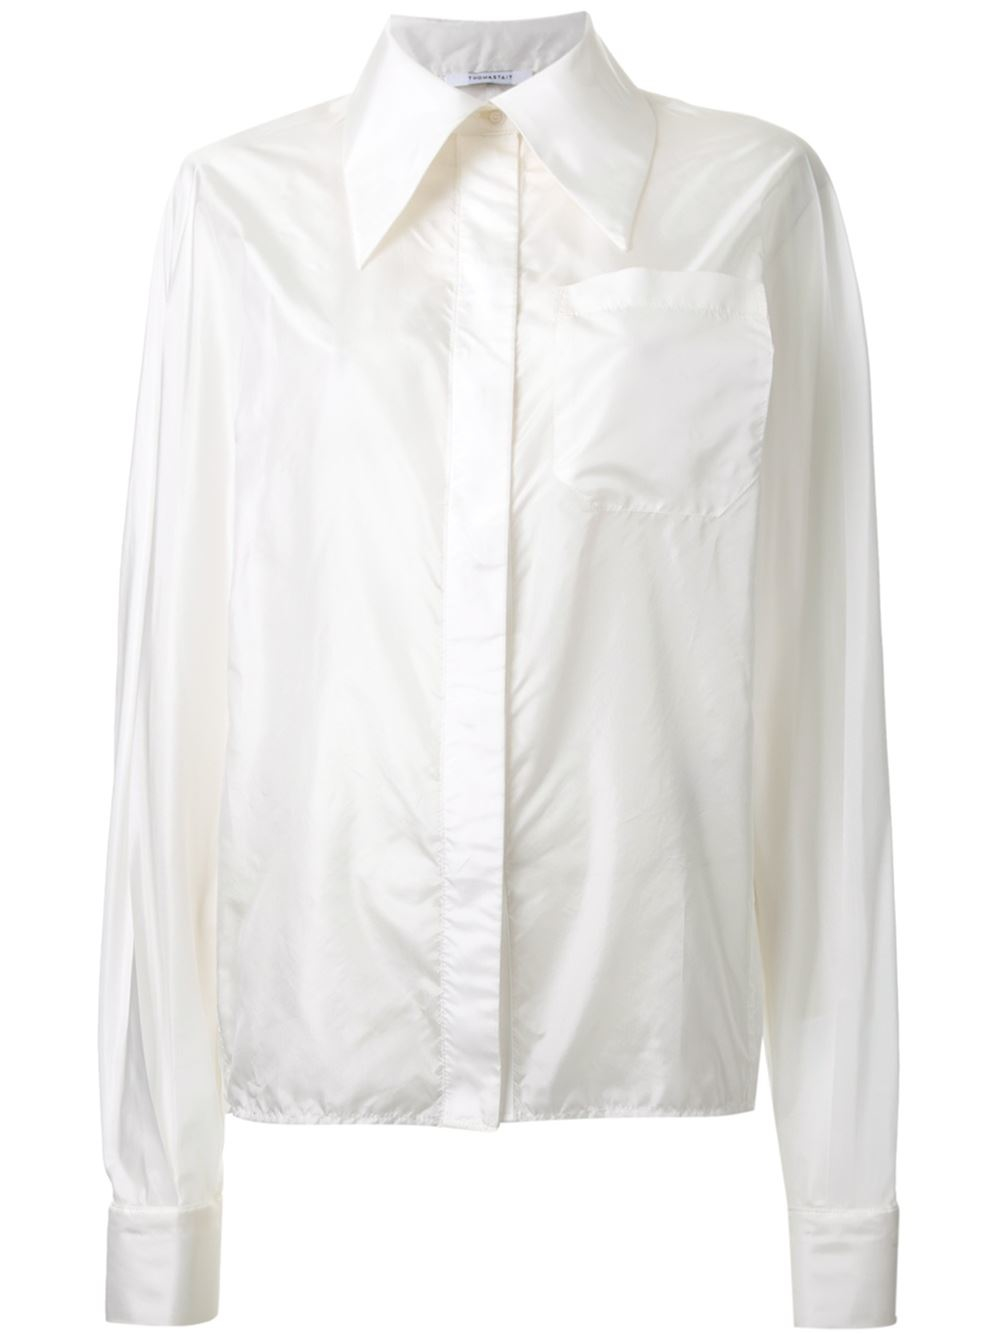 Thomas tait Over Sized Collar Shirt in White | Lyst